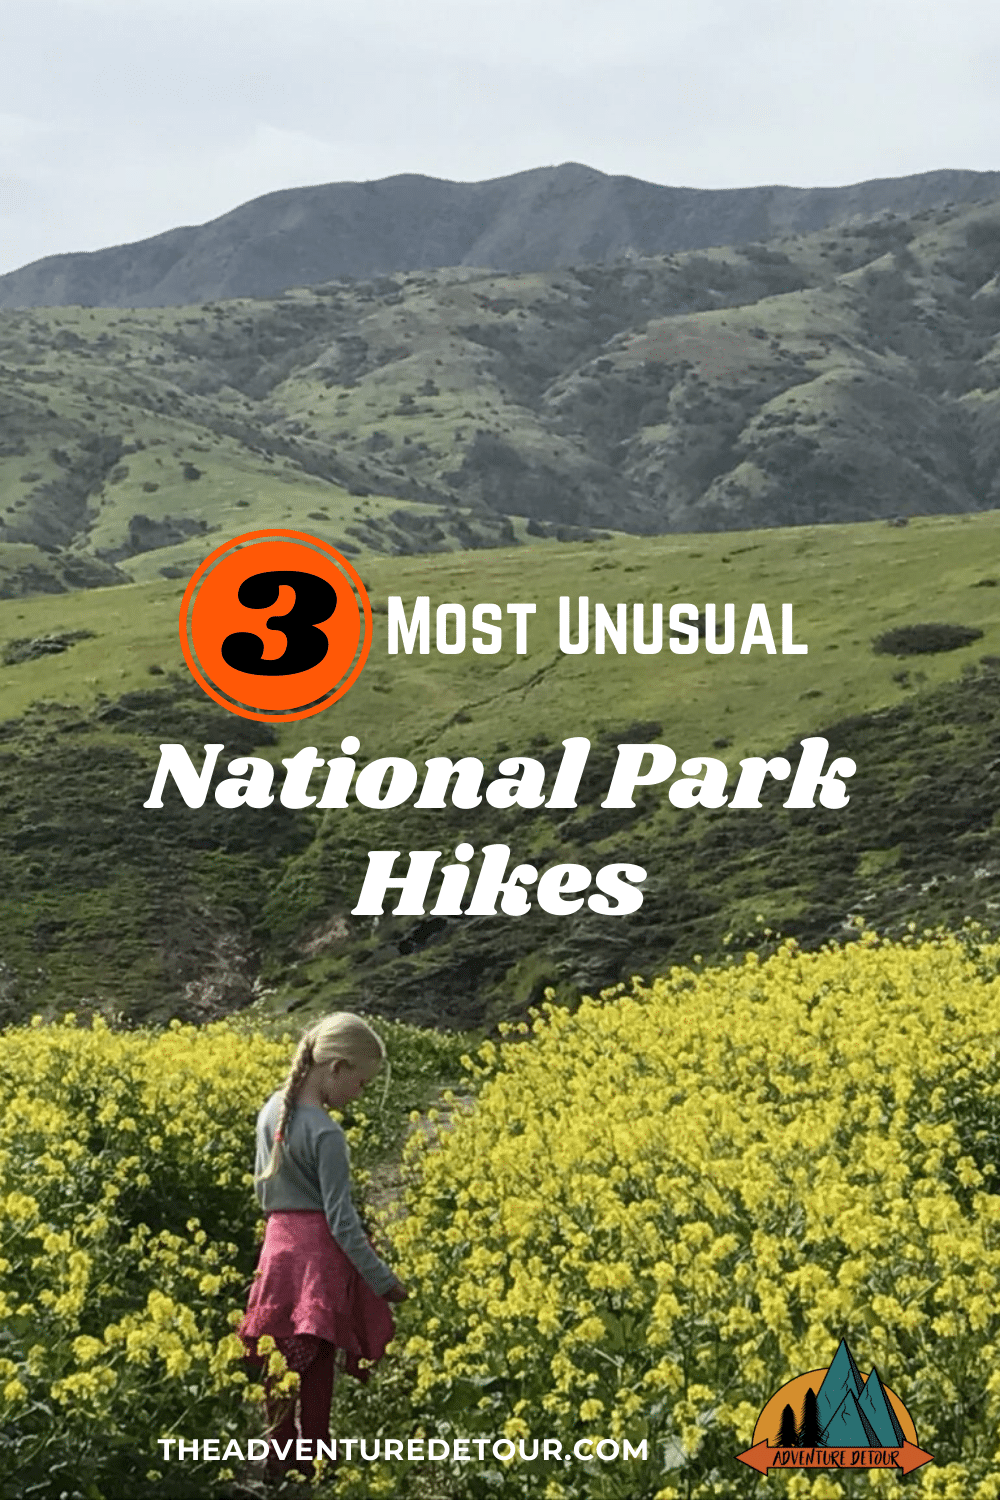 Girl Is Hiking On A Trail With Wild Flowers Unusual National Park Hikes